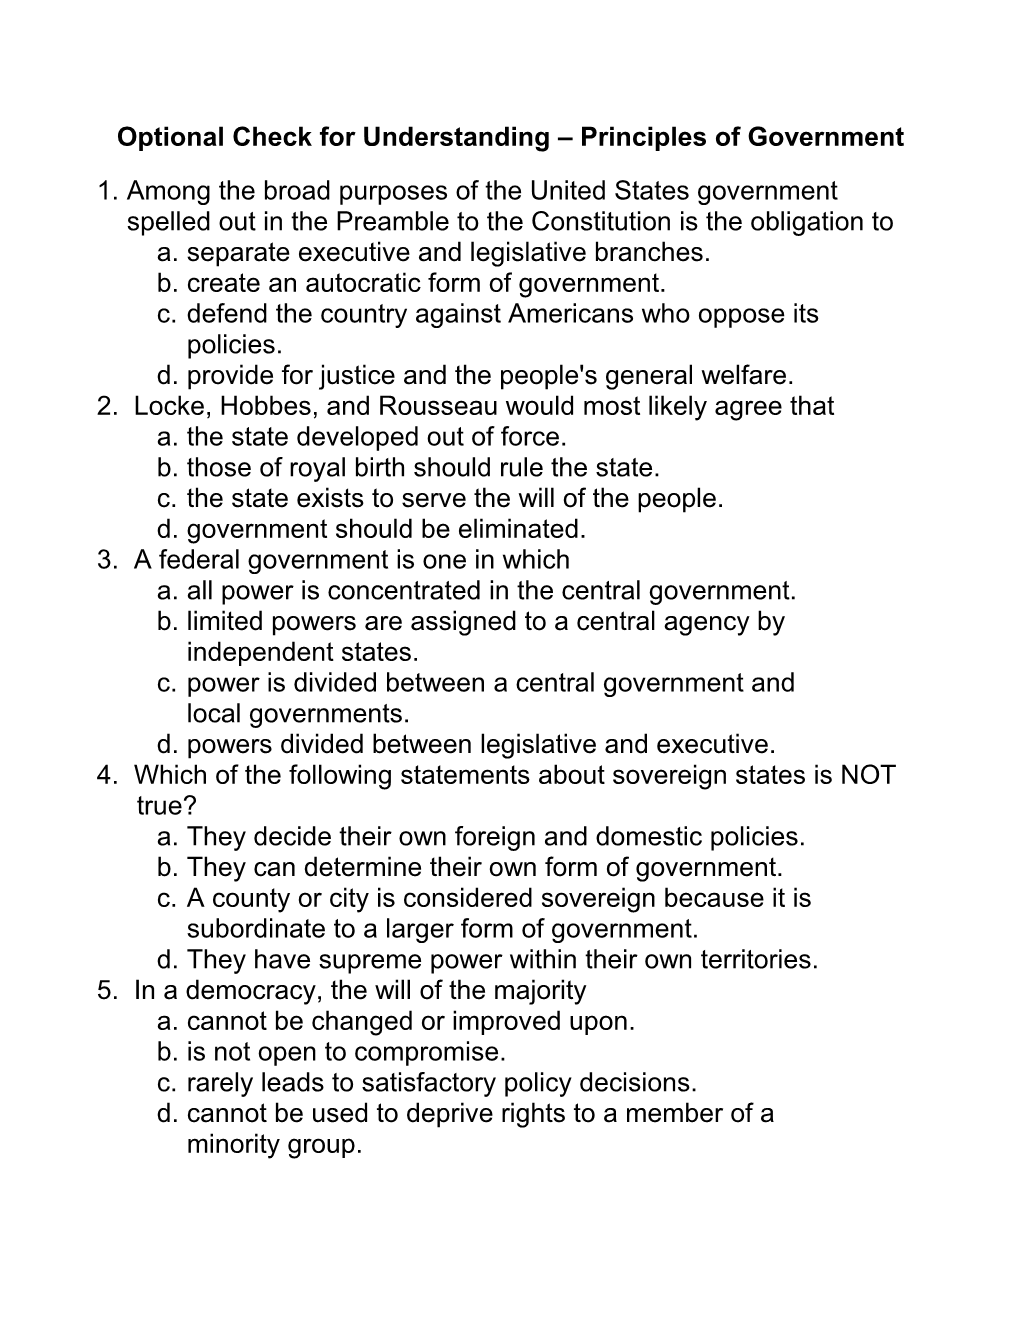 Optional Check for Understanding Principles of Government